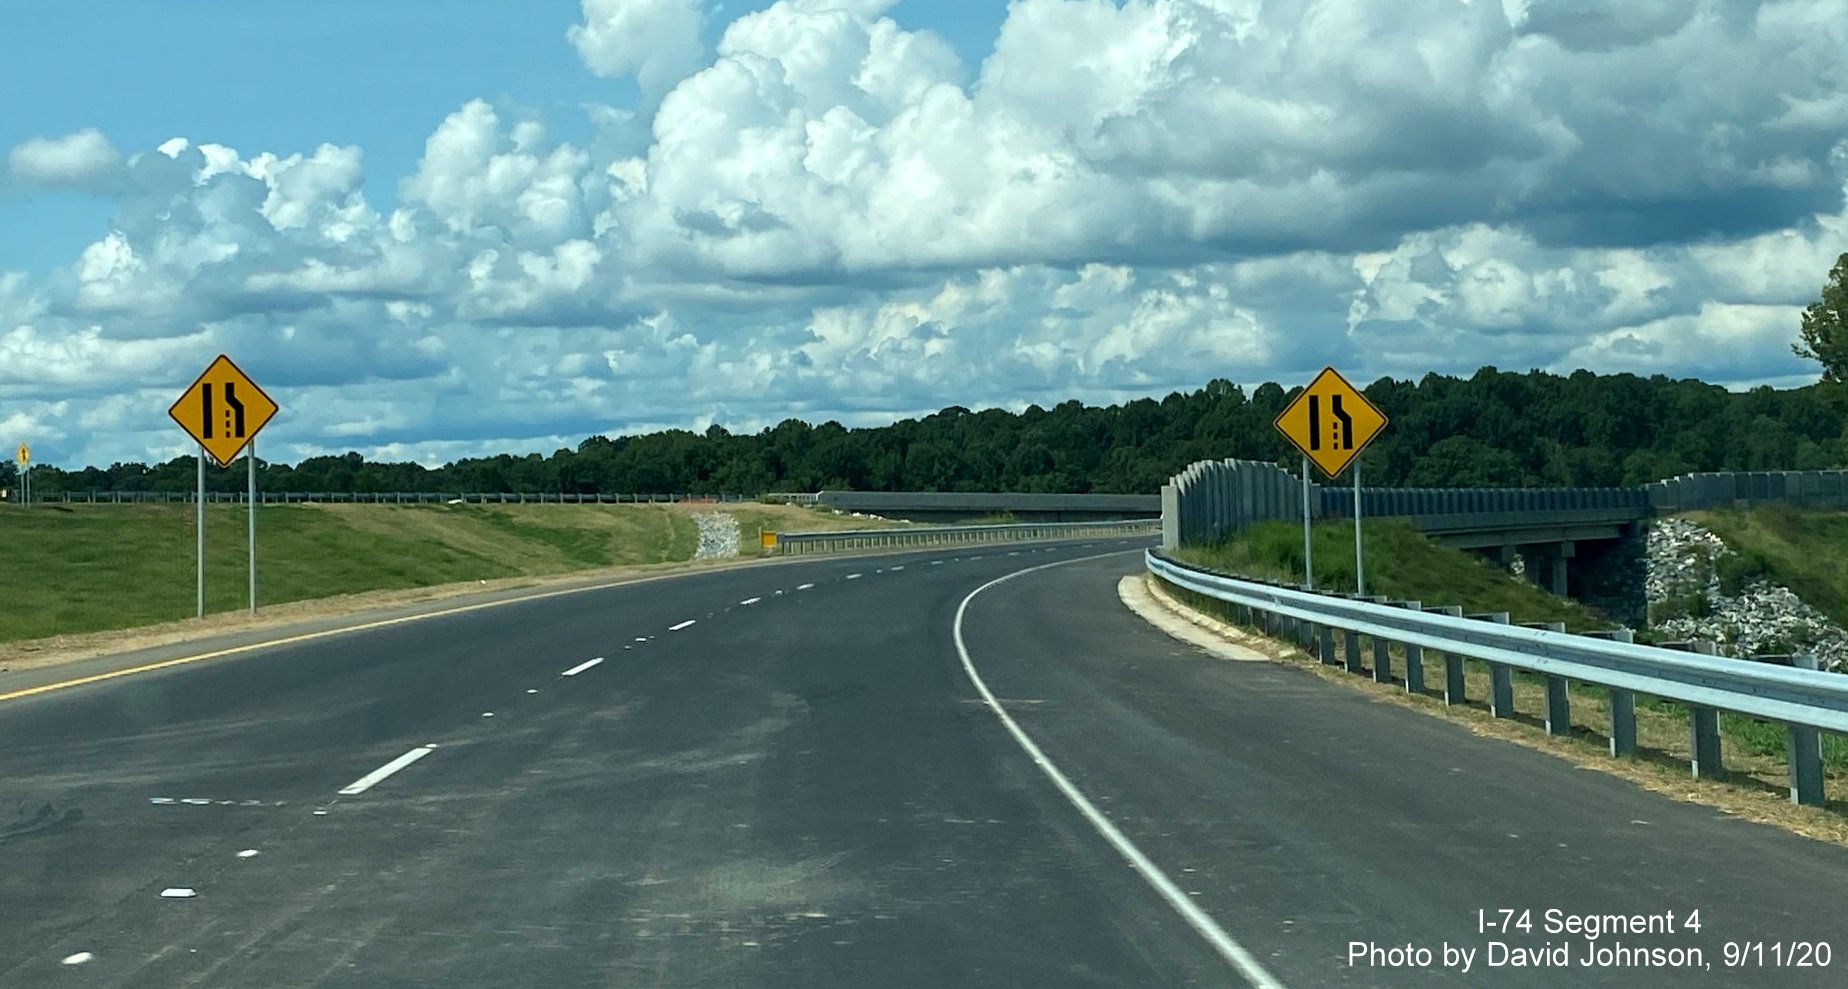 Image of newly opened two-lane ramp from US 421 North Salem Parkway to NC 74 West Winston Salem Northern Beltway, by David Johnson September 2020